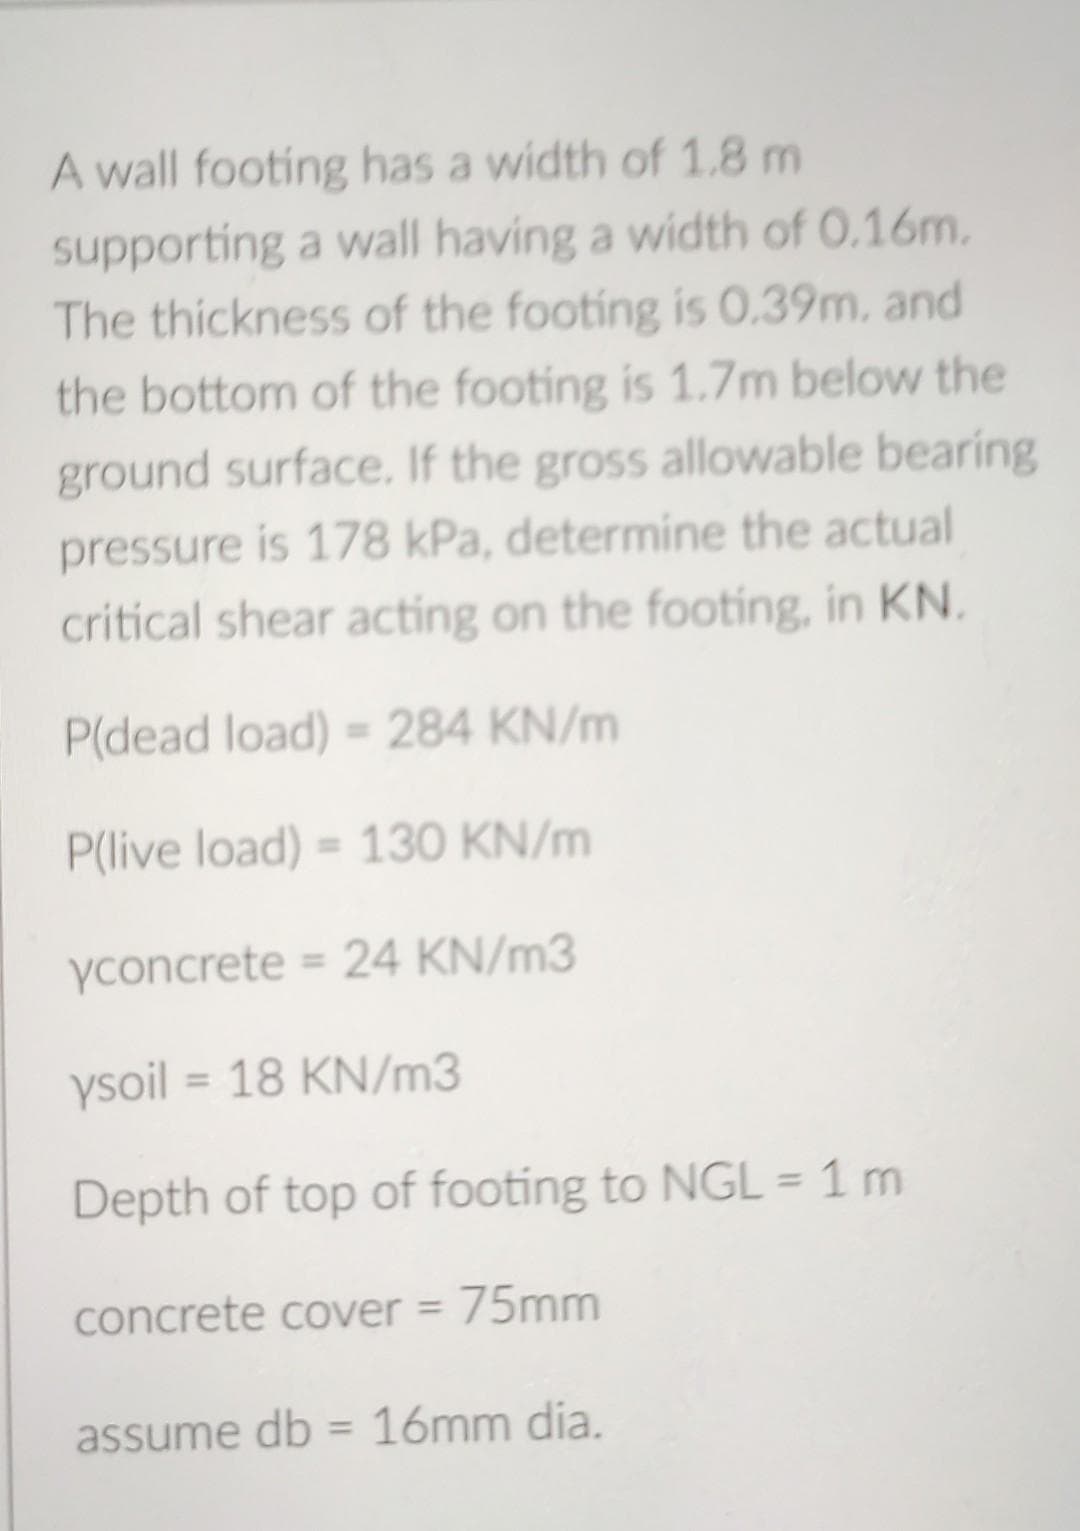 A wall footing has a width of 1.8 m
supporting a wall having a width of 0.16m.
The thickness of the footing is 0.39m, and
the bottom of the footing is 1.7m below the
ground surface. If the gross allowable bearing
pressure is 178 kPa, determine the actual
critical shear acting on the footing, in KN.
P(dead load) = 284 KN/m
P(live load) = 130 KN/m
yconcrete = 24 KN/m3
ysoil = 18 KN/m3
Depth of top of footing to NGL = 1 m
concrete cover = 75mm
assume db 16mm dia.